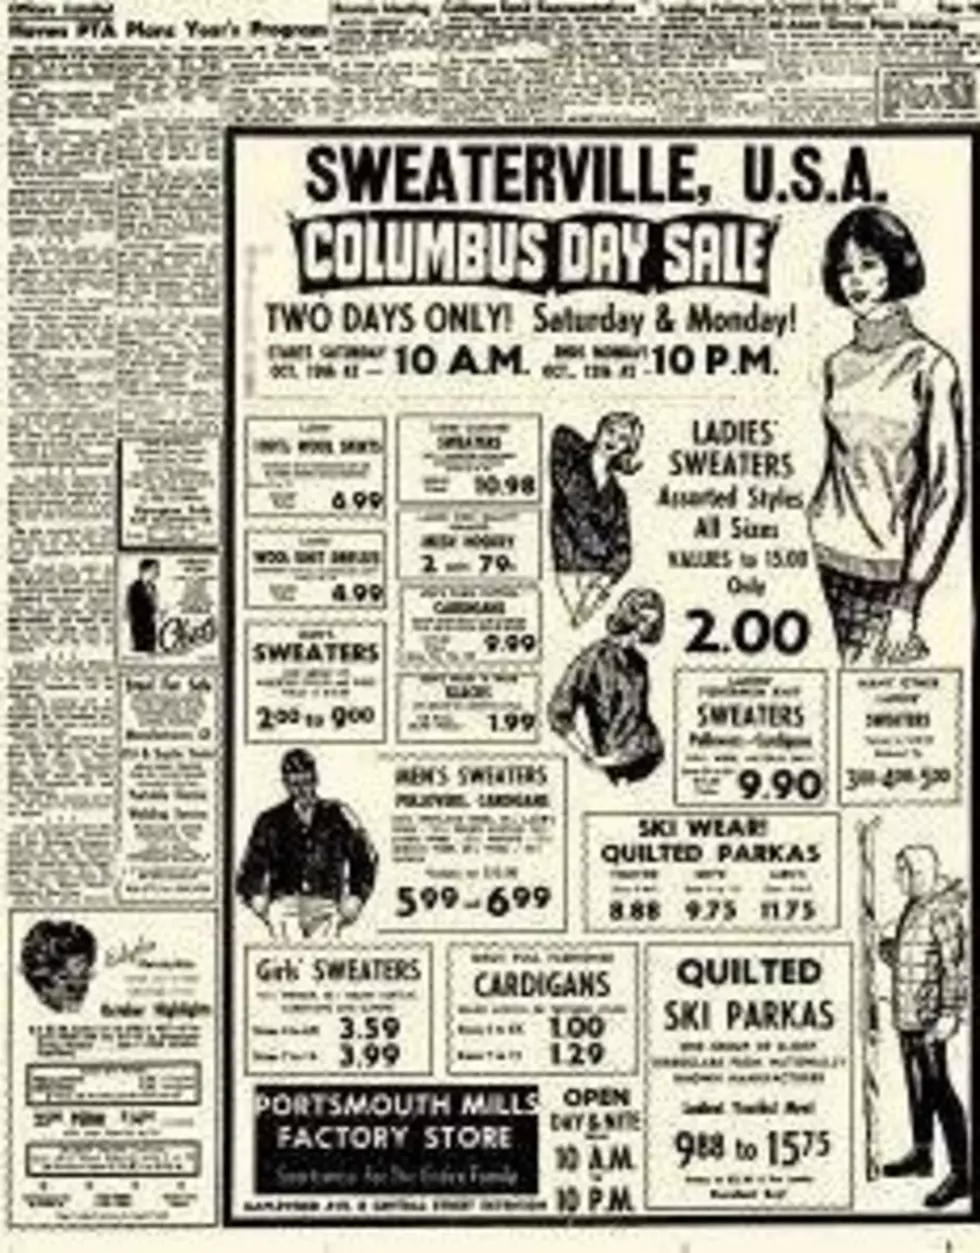 Remember Shopping at Artisan Outlet and Sweaterville U.S.A in NH?